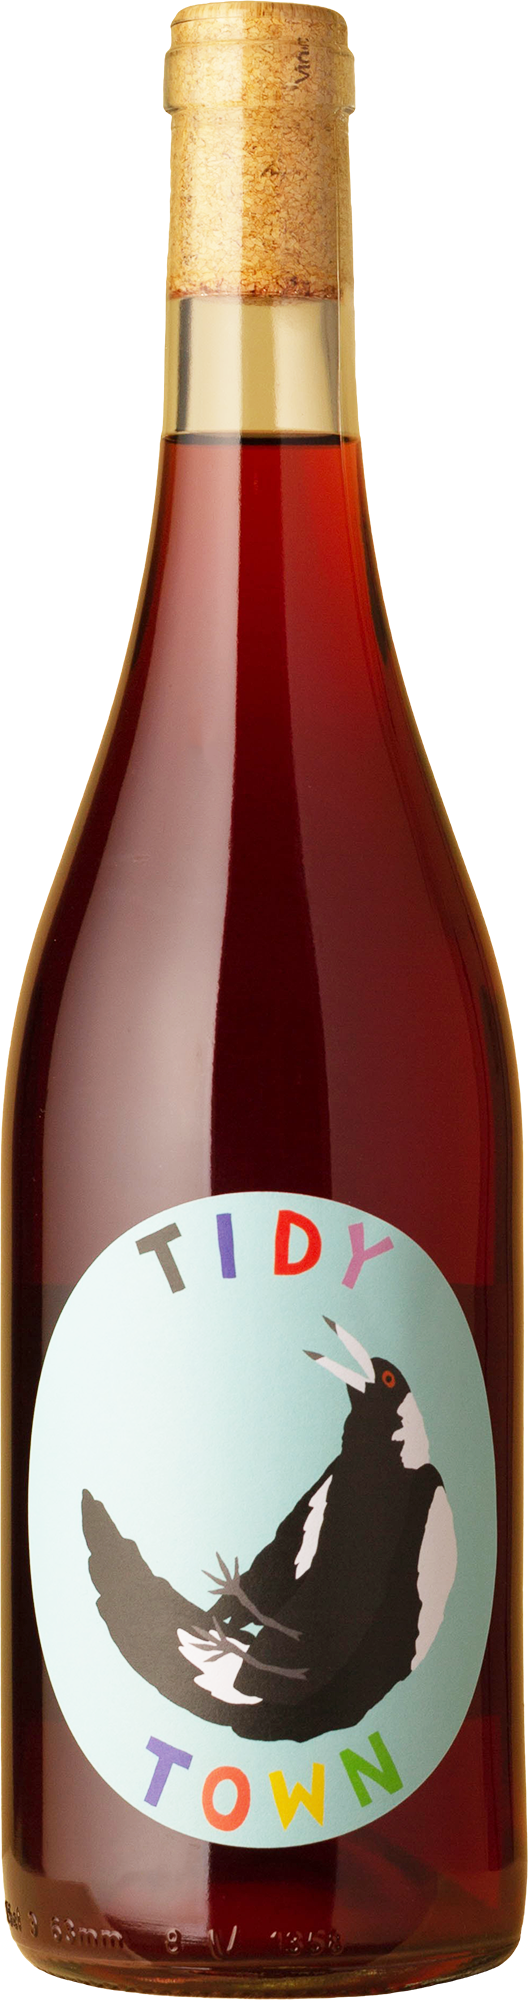 Tidy Town - Chilled Red Lambrusco Maestri 2022